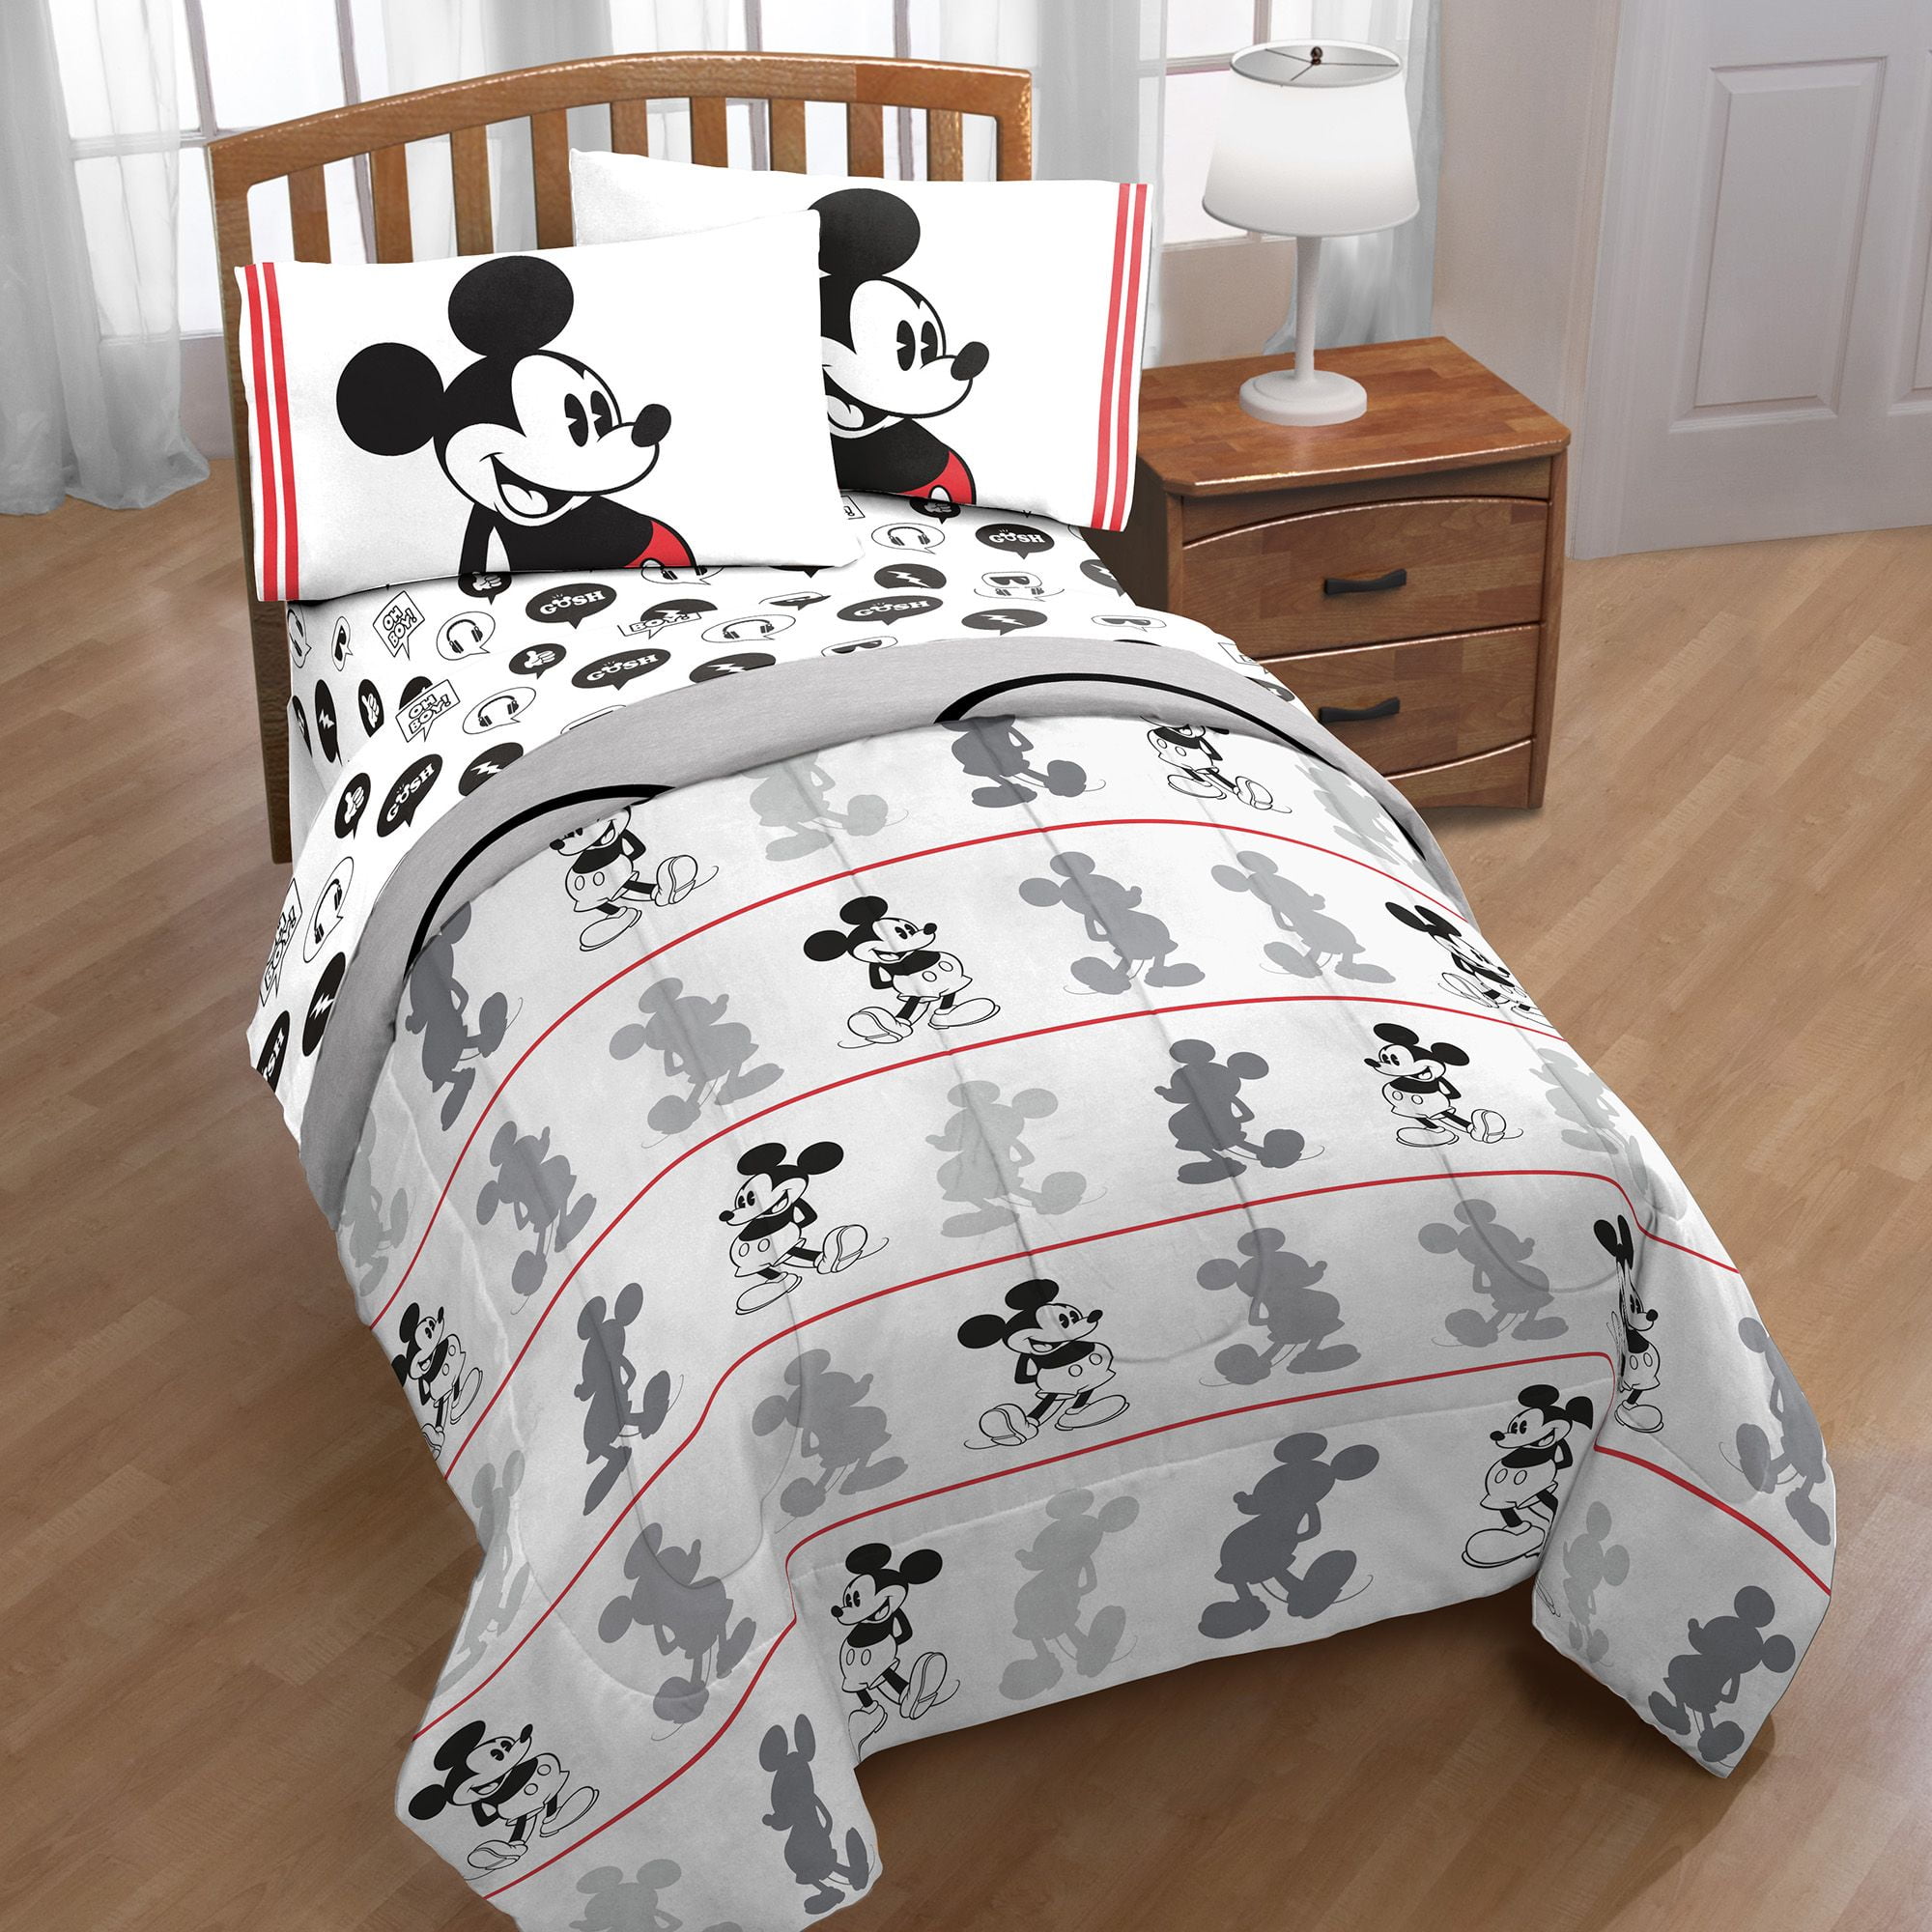 Double King Duvet Cover Sets Disney Mickey Mouse 90th Anniversary